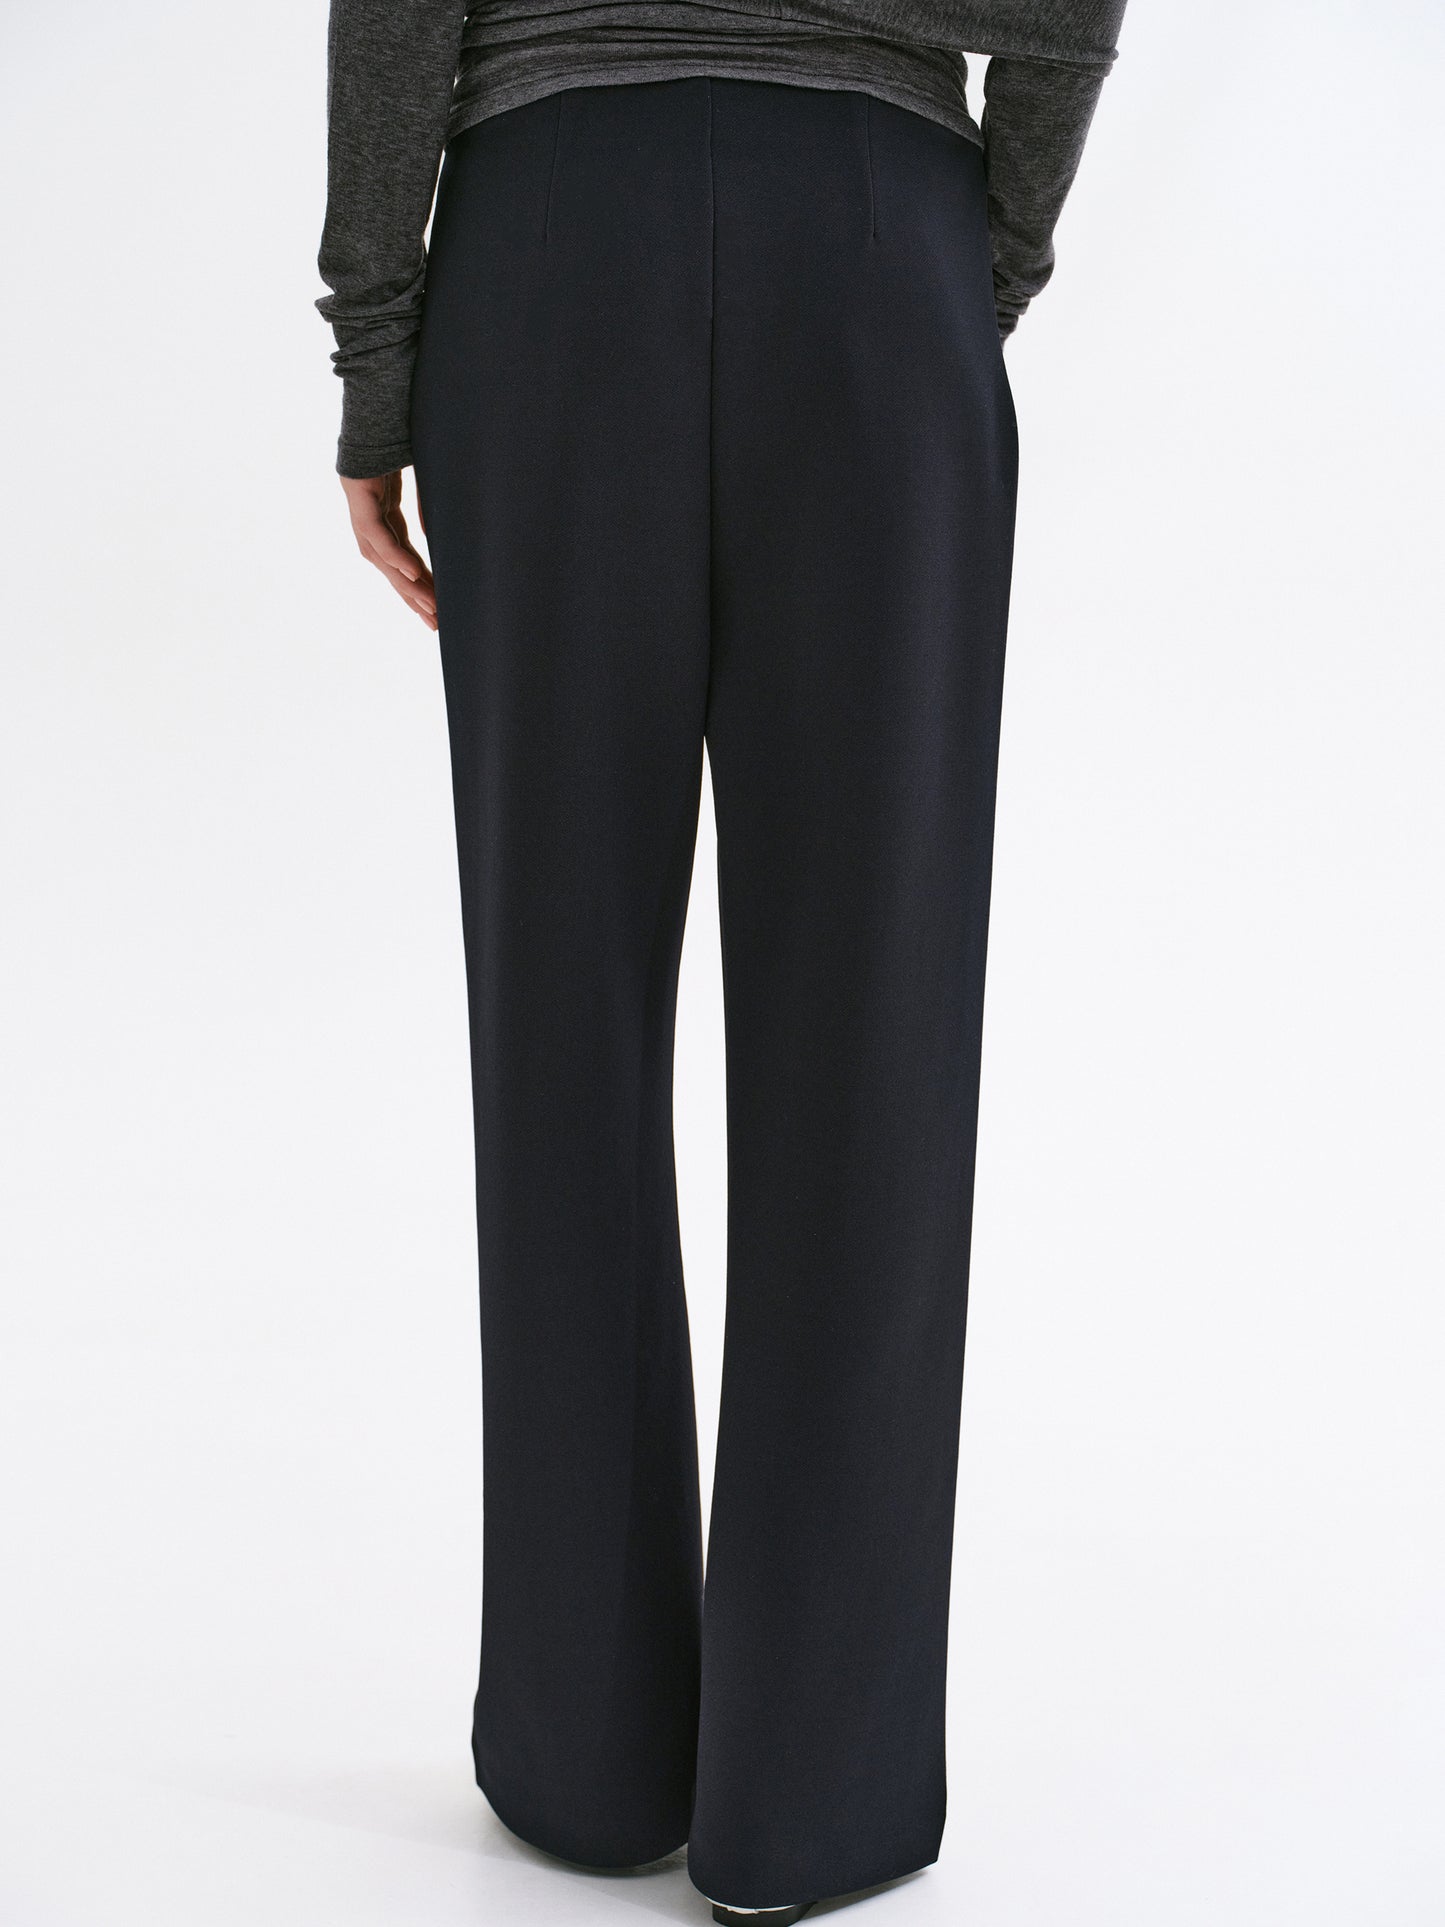 Elasticated Comfort Trousers, Navy